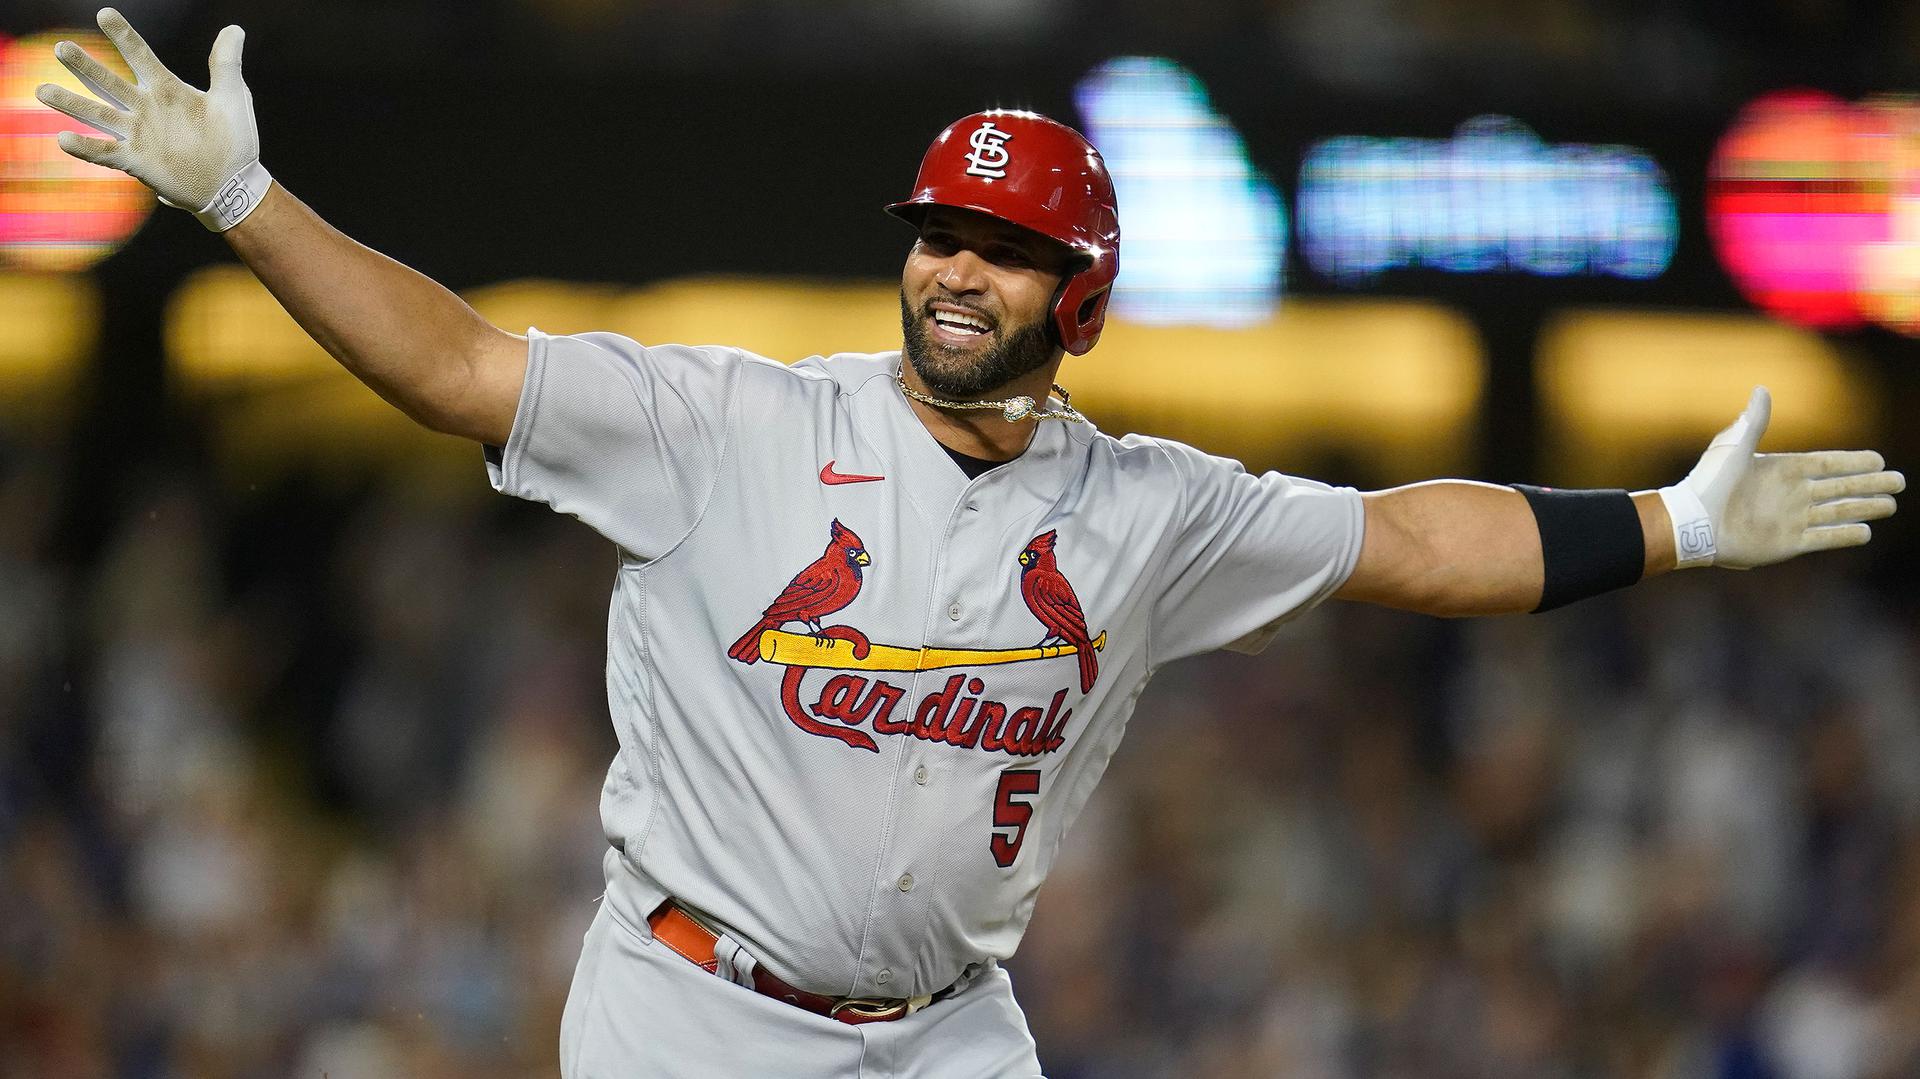 Albert Pujols, with arms outstretched, celebrates his 700th career home run